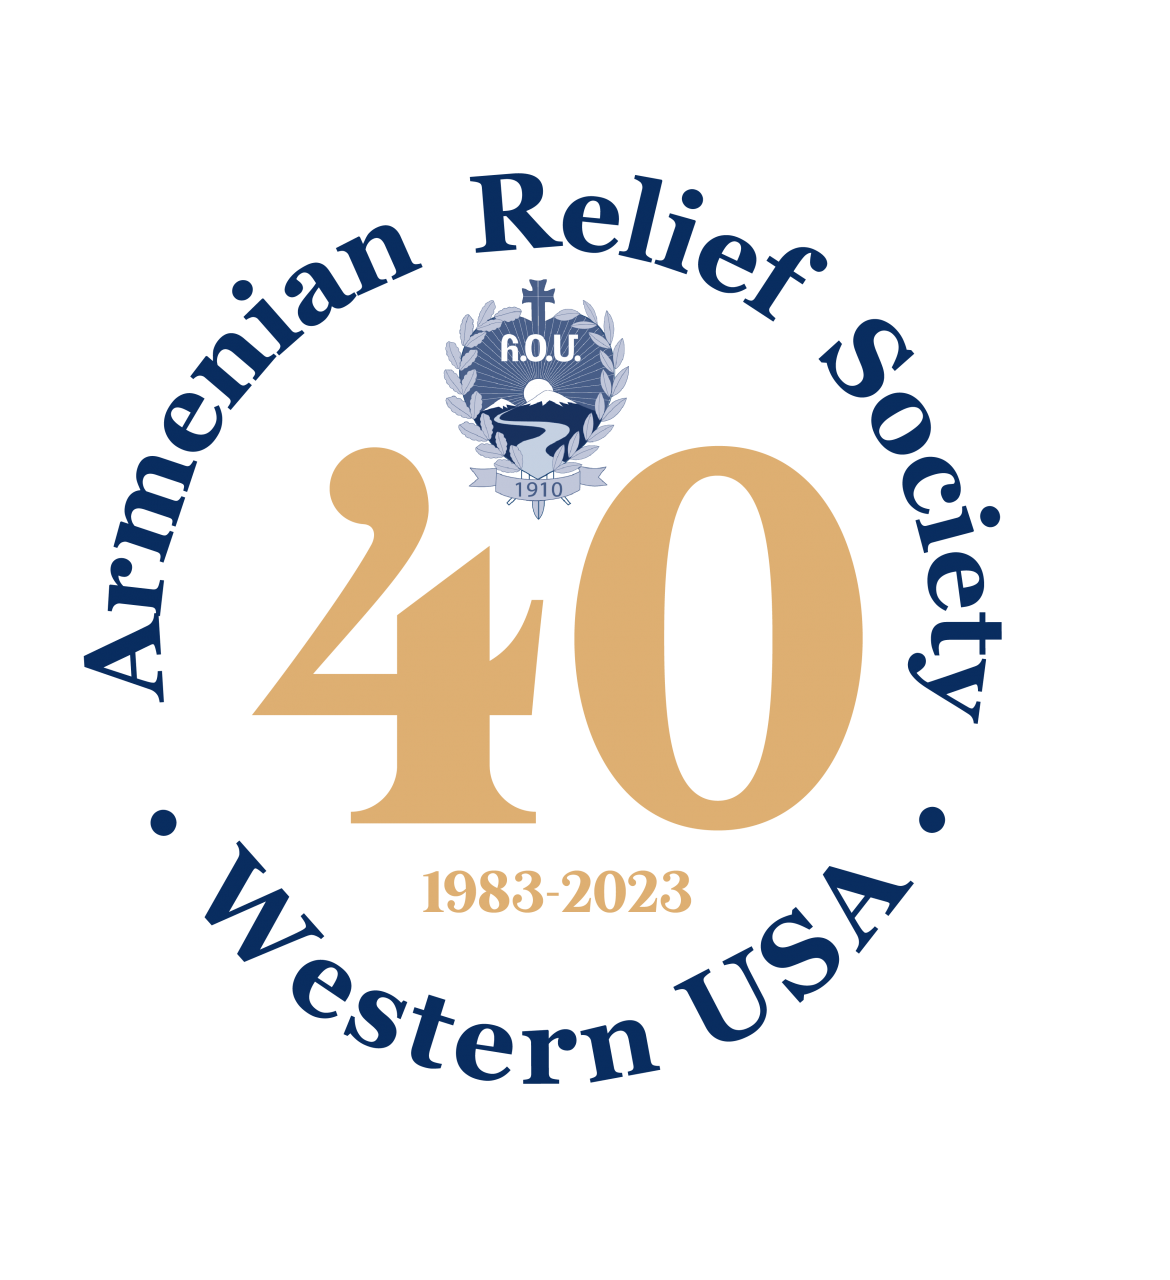 ARS of Western USA’s Gala 2023 to be Held on March 12, 2023